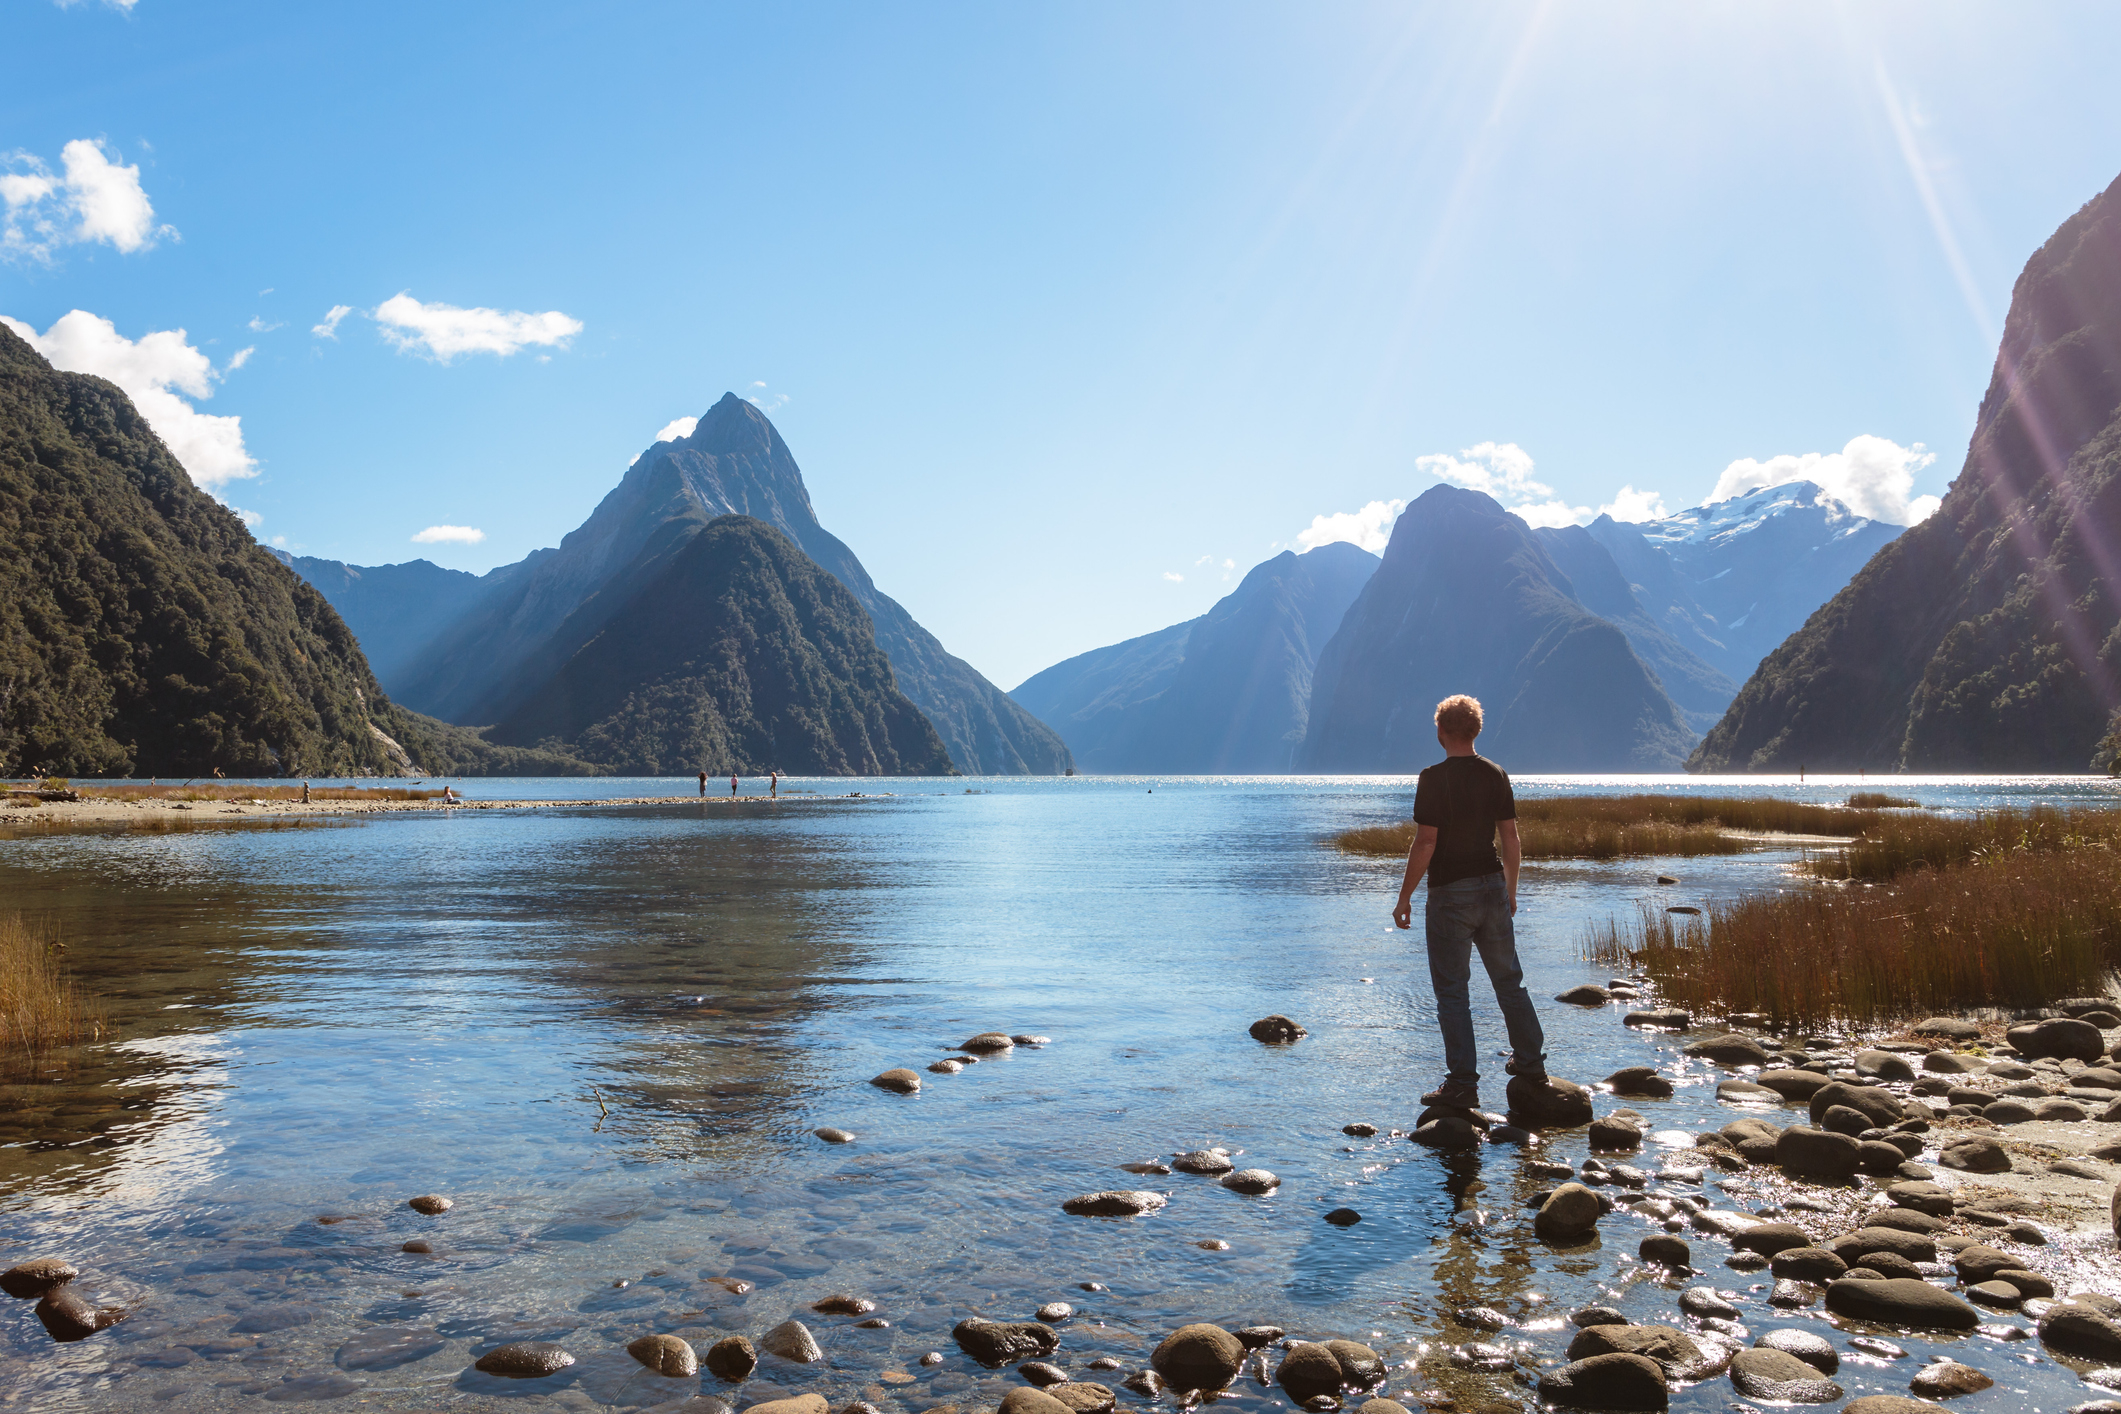 A person stands on rocky shore looking at a serene lake with mountains in the background. Sunlight casts a warm glow over the scene